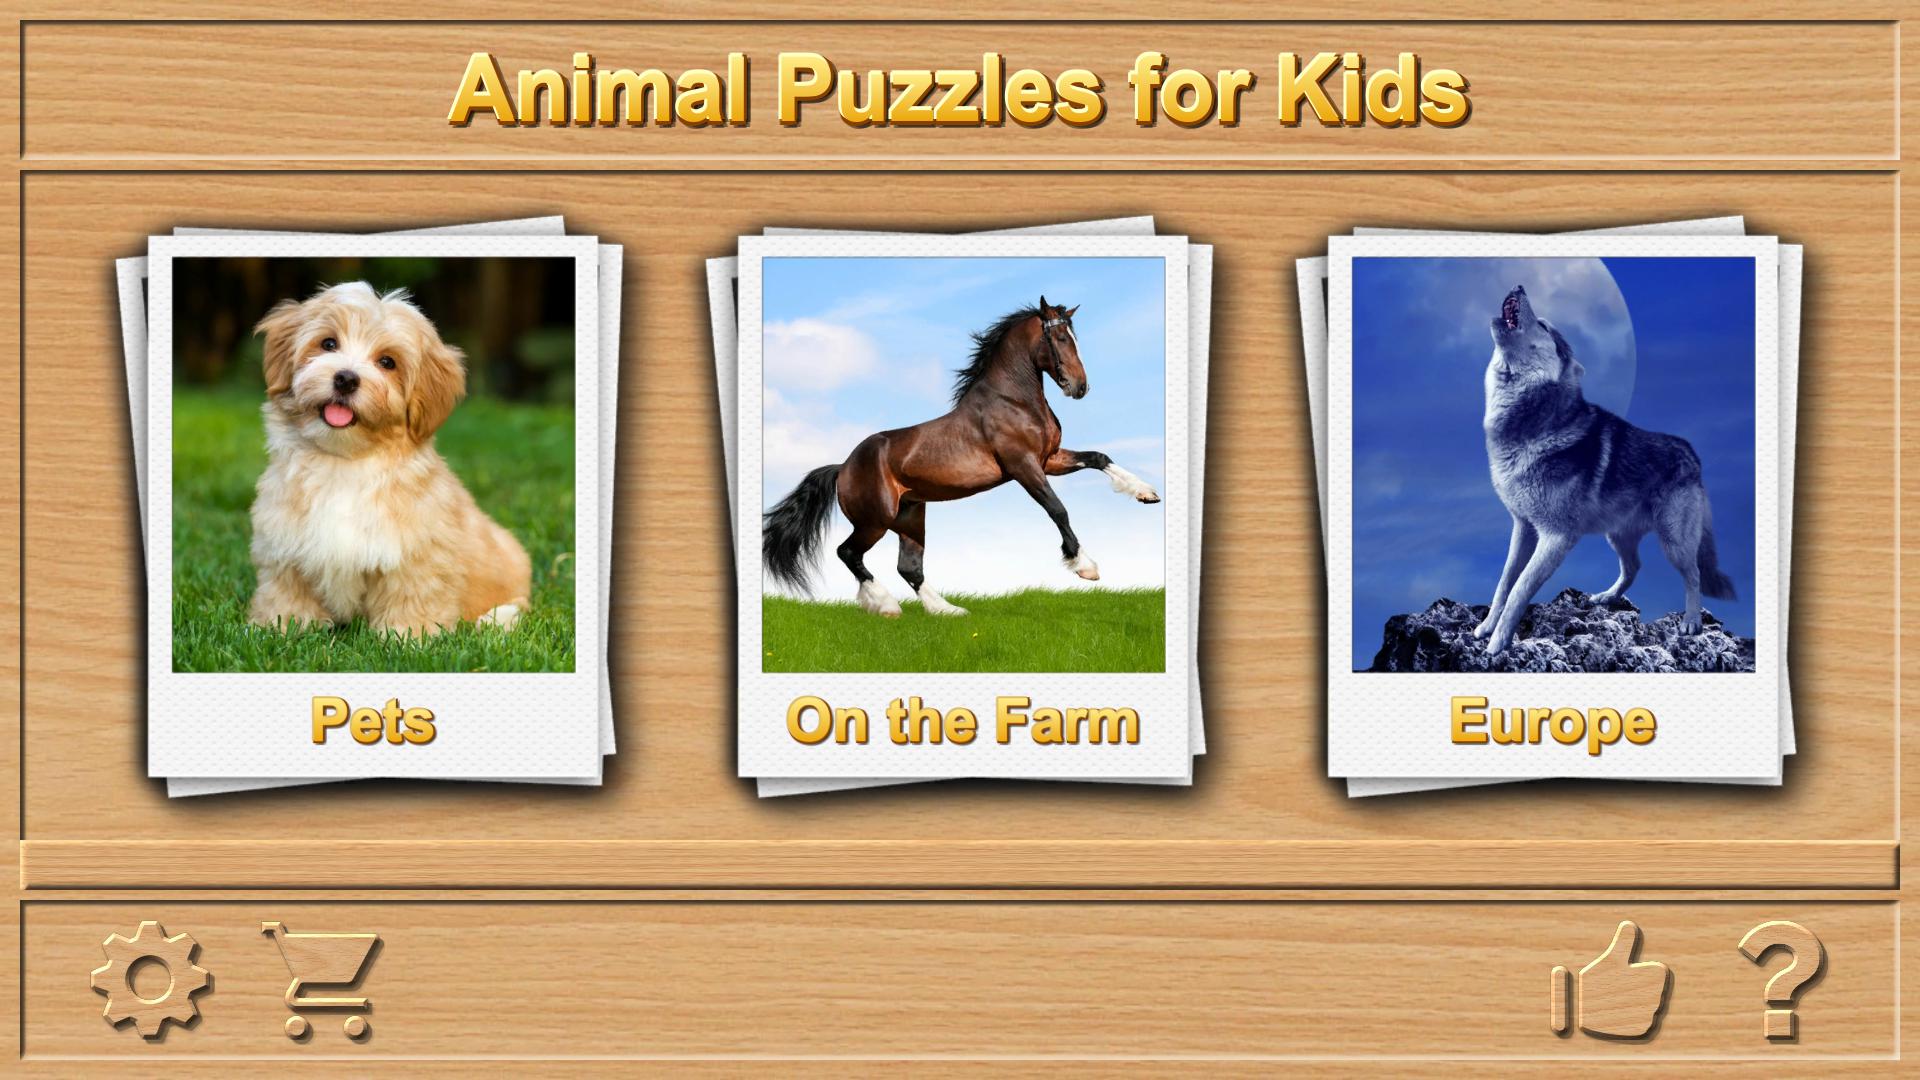 Animal Sounds - Jigsaw Puzzles for Kids.